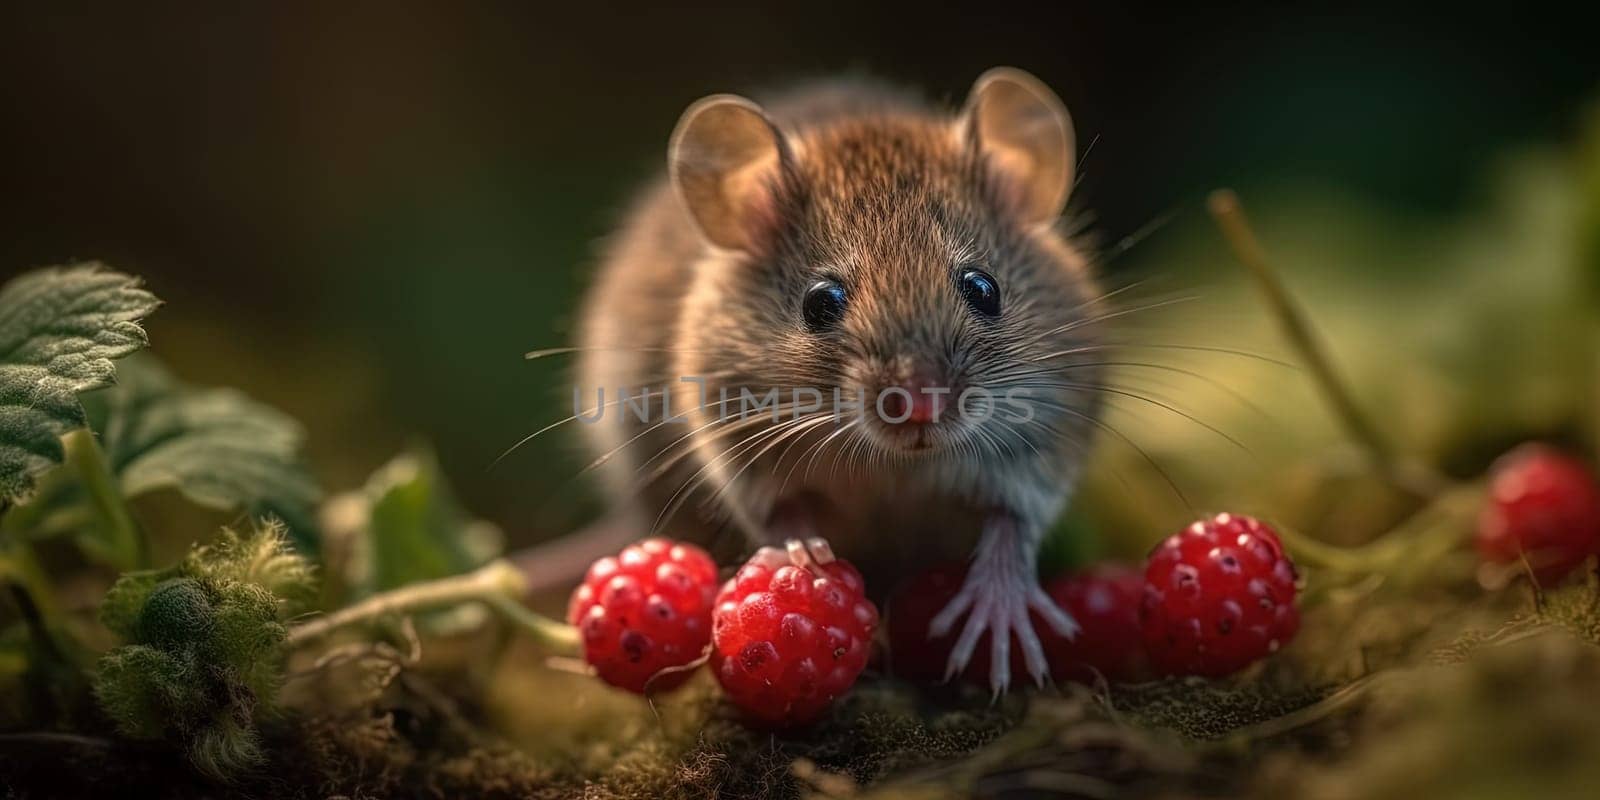 Wild Grey Mouse Eating Fresh Raspberry In The Forest by tan4ikk1